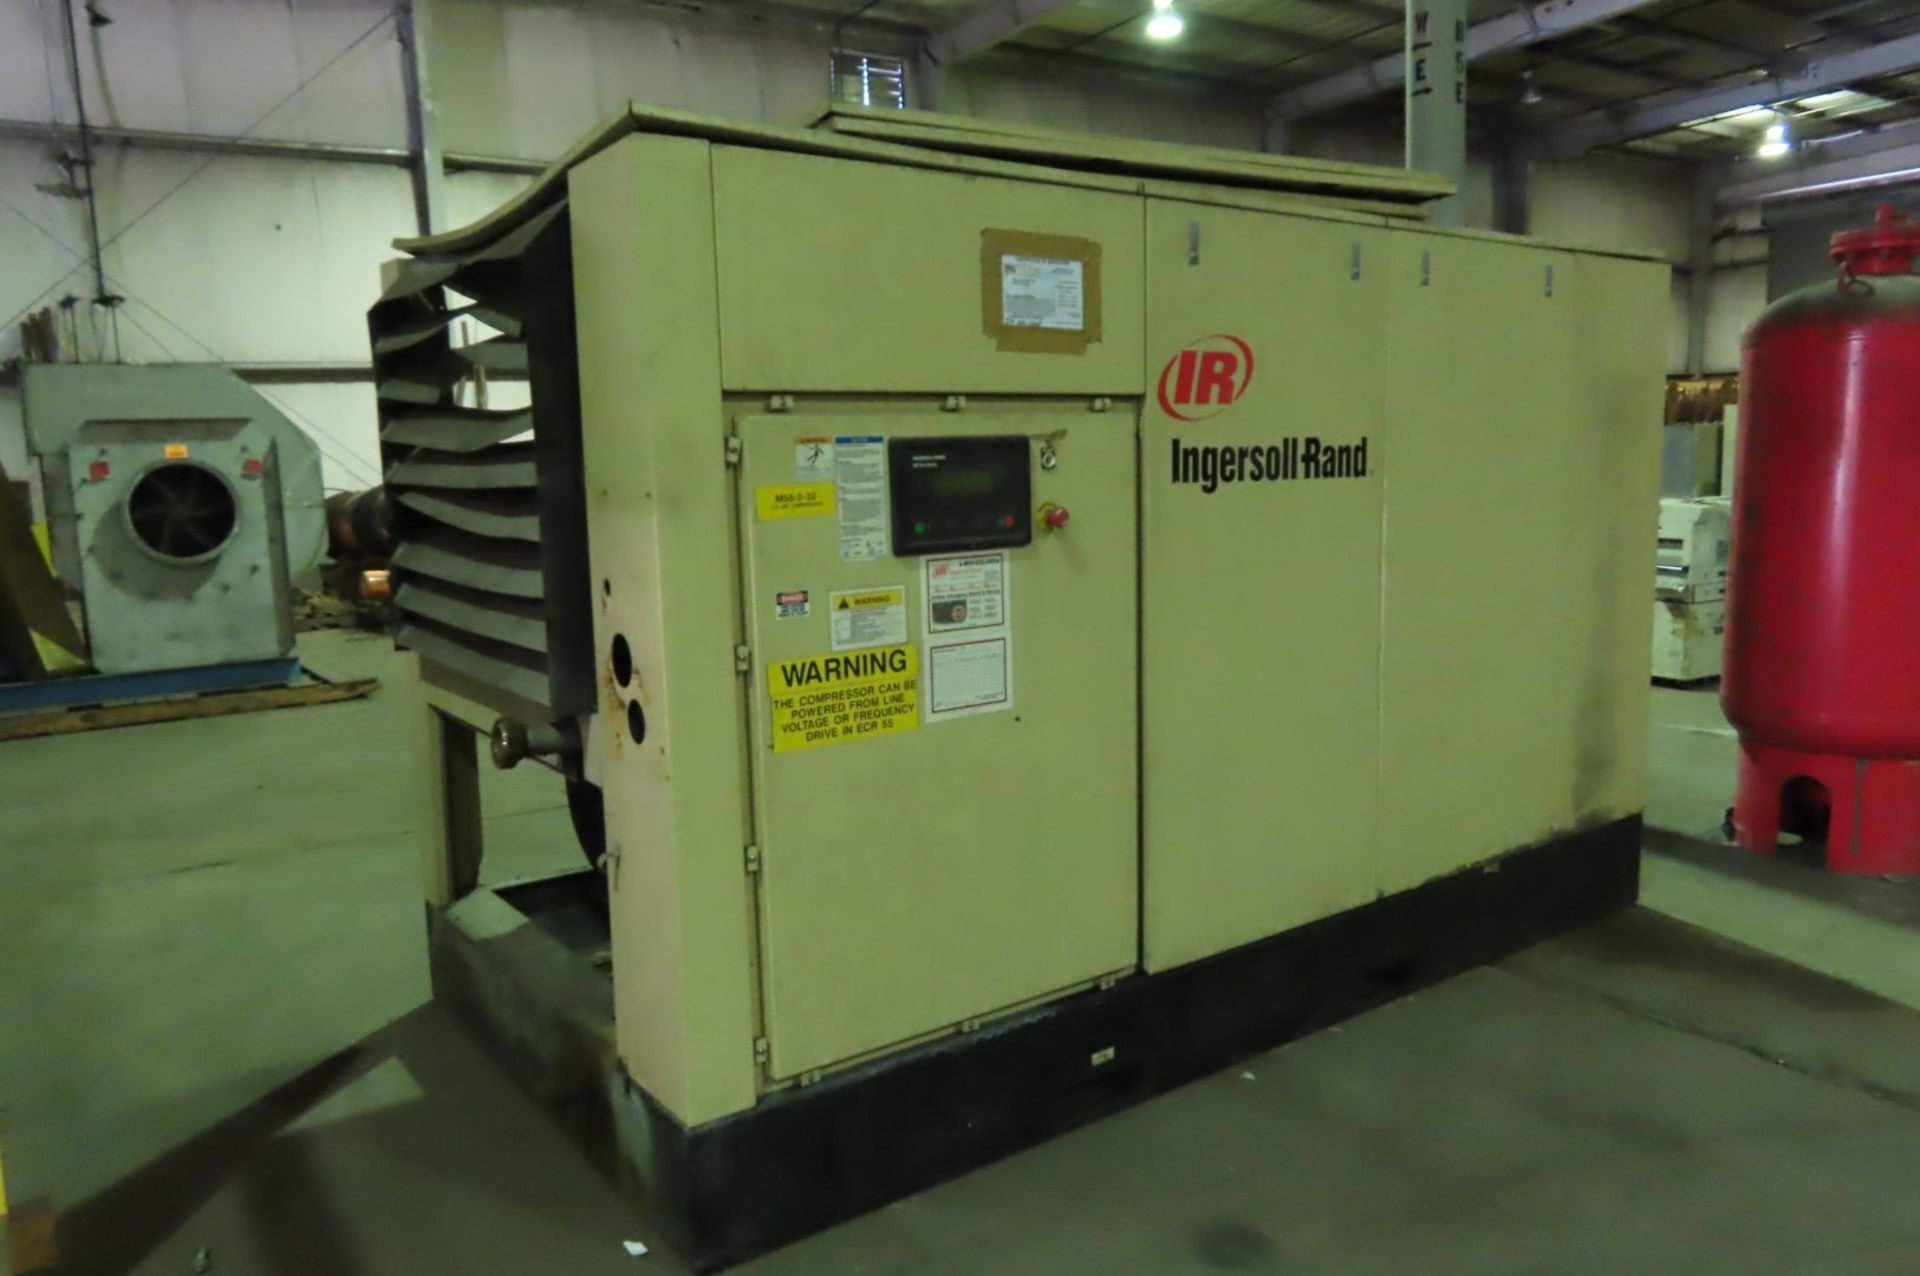 Ingersoll Rand air compressor, mod SSRXF150, s/n UO6336, 739 CFM cap, 100 psi, 460V [Area: Savage - Image 2 of 2